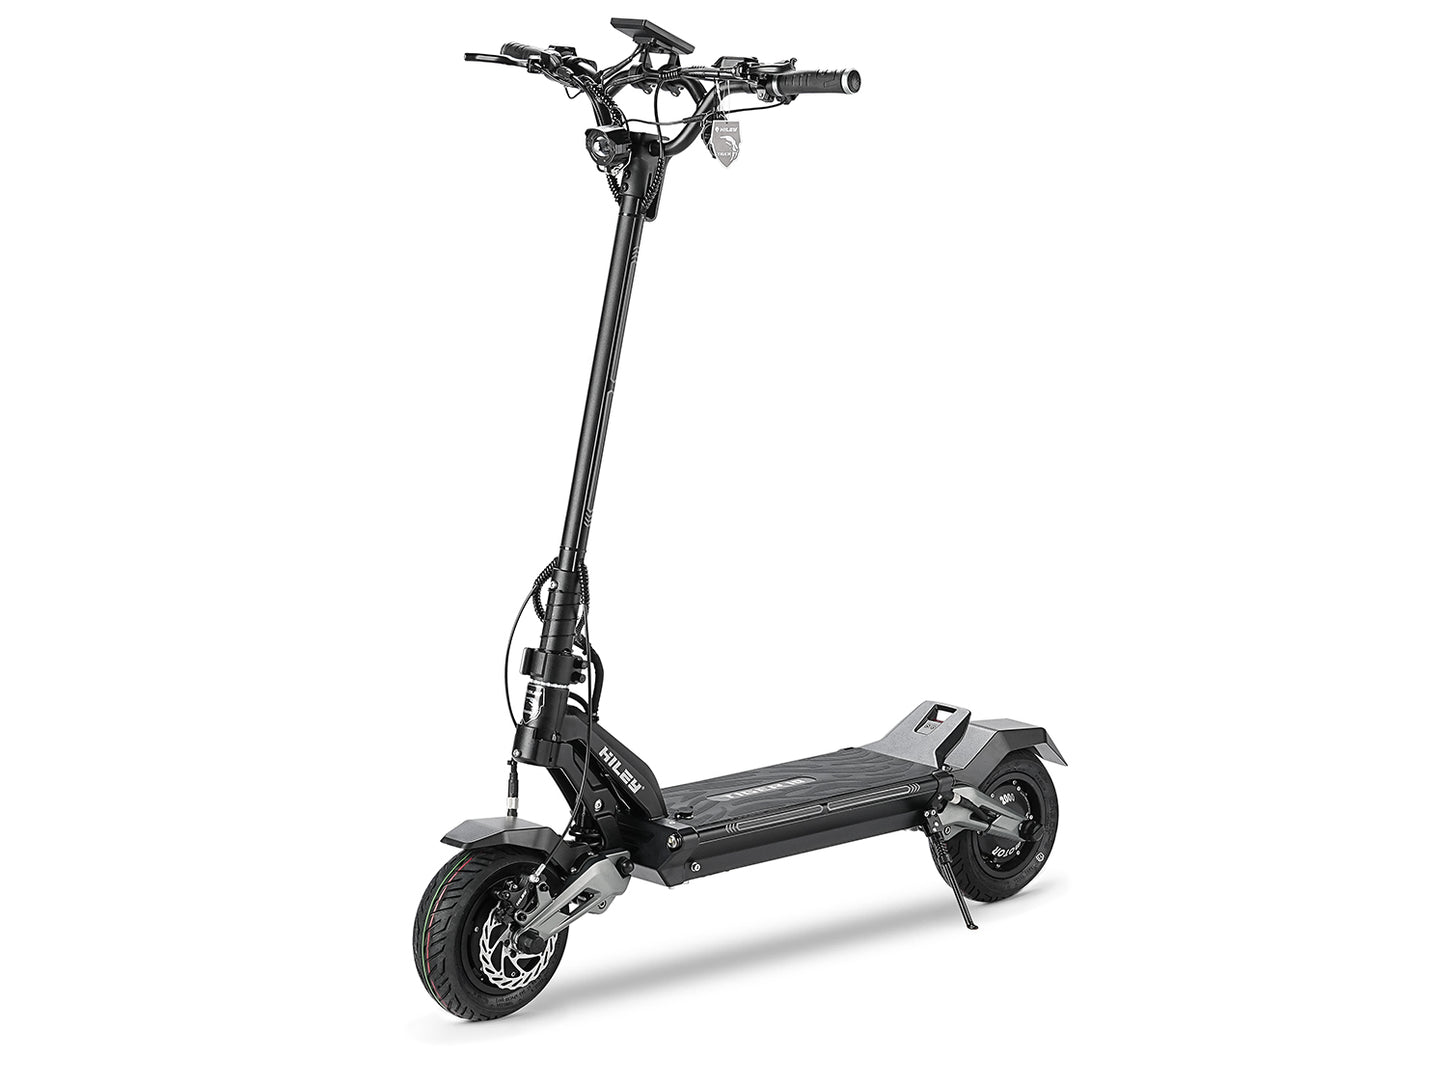 HILEY Tiger10 lite 1000W*2 Electric Scooter